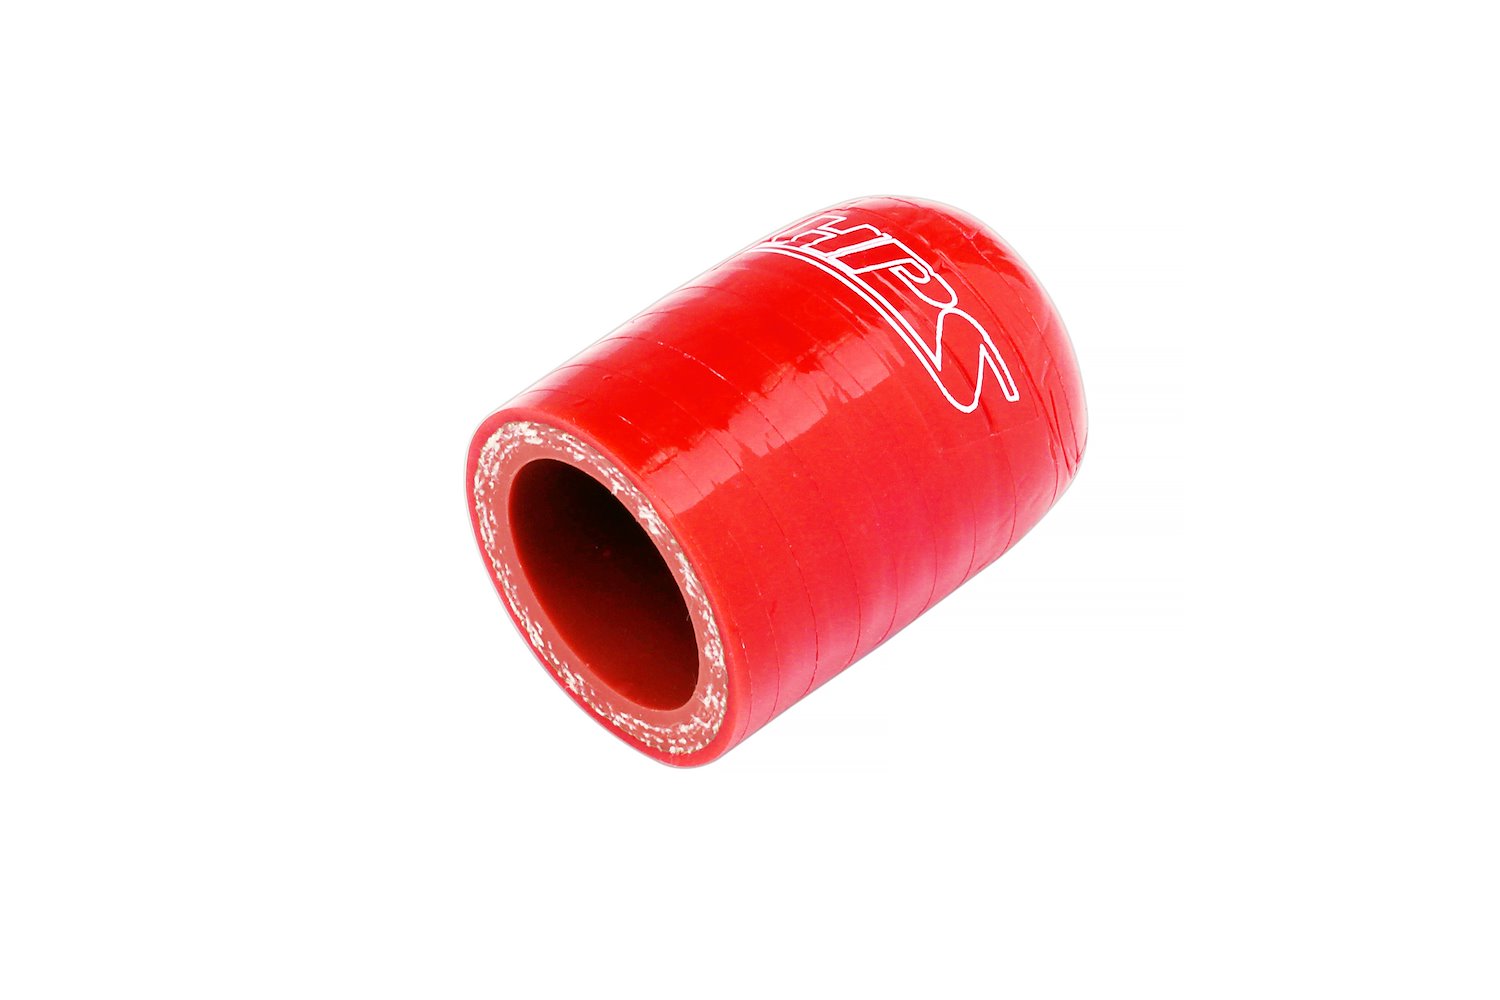 RSCC-075-RED Coolant Bypass Cap, 3-Ply Reinforced High-Temp. Silicone Bypass Cap, 3/4 in. ID, Red